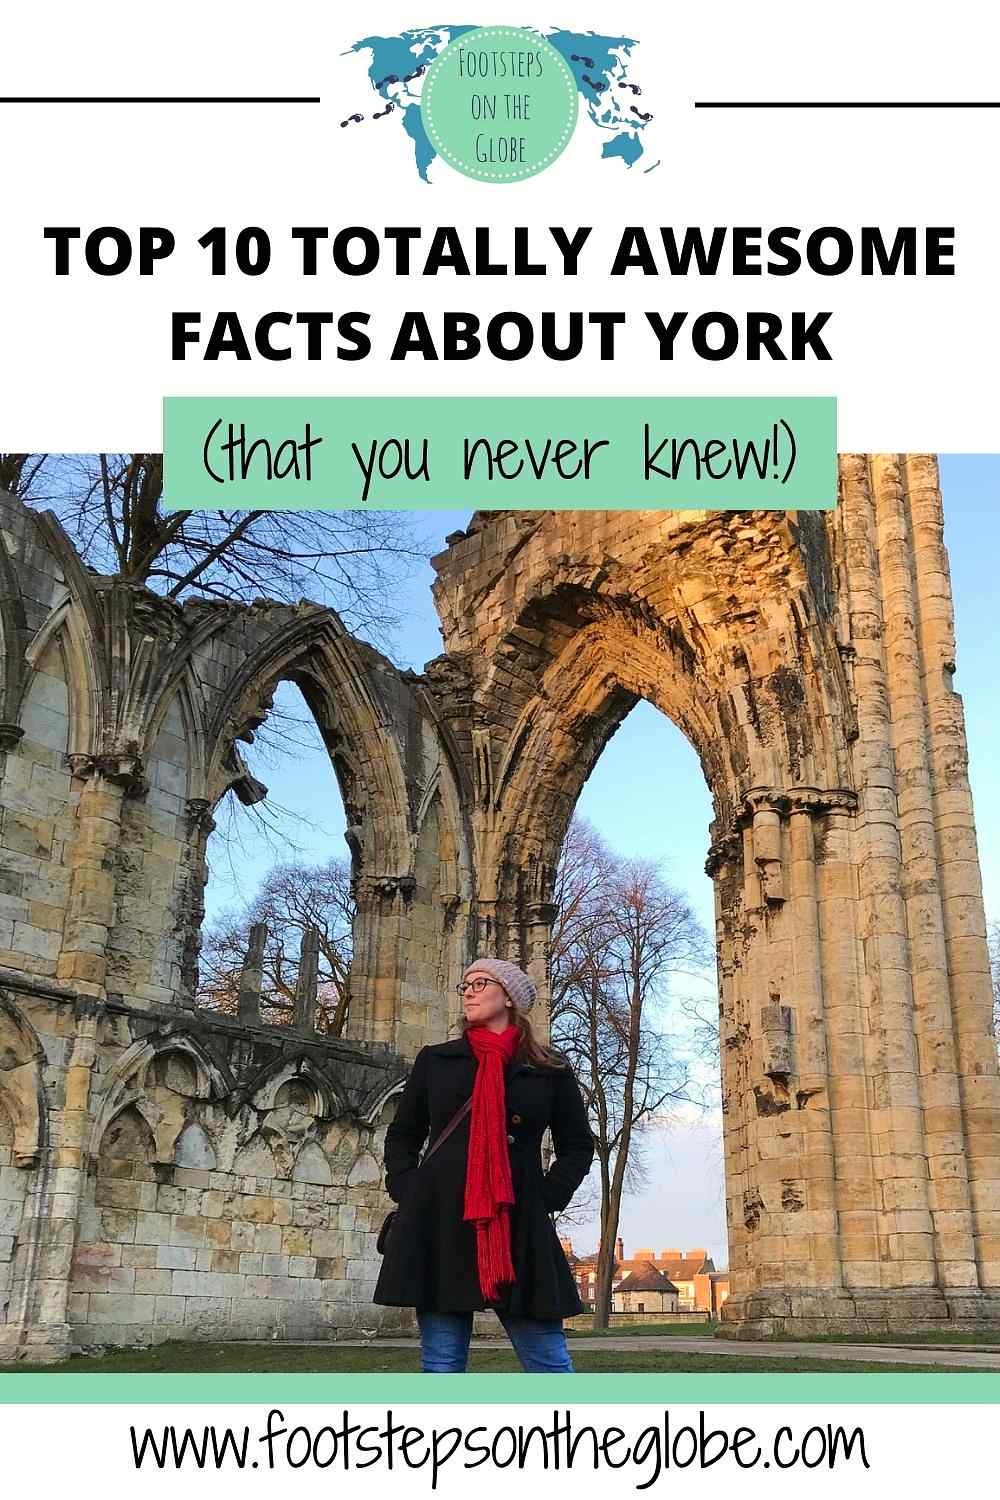 Pinterest image of old ruins of a catholic church in York with Mel stood in front of it wearing a black coat and glasses with the text: "Top 10 totally awesome facts about York (that you never knew!)"